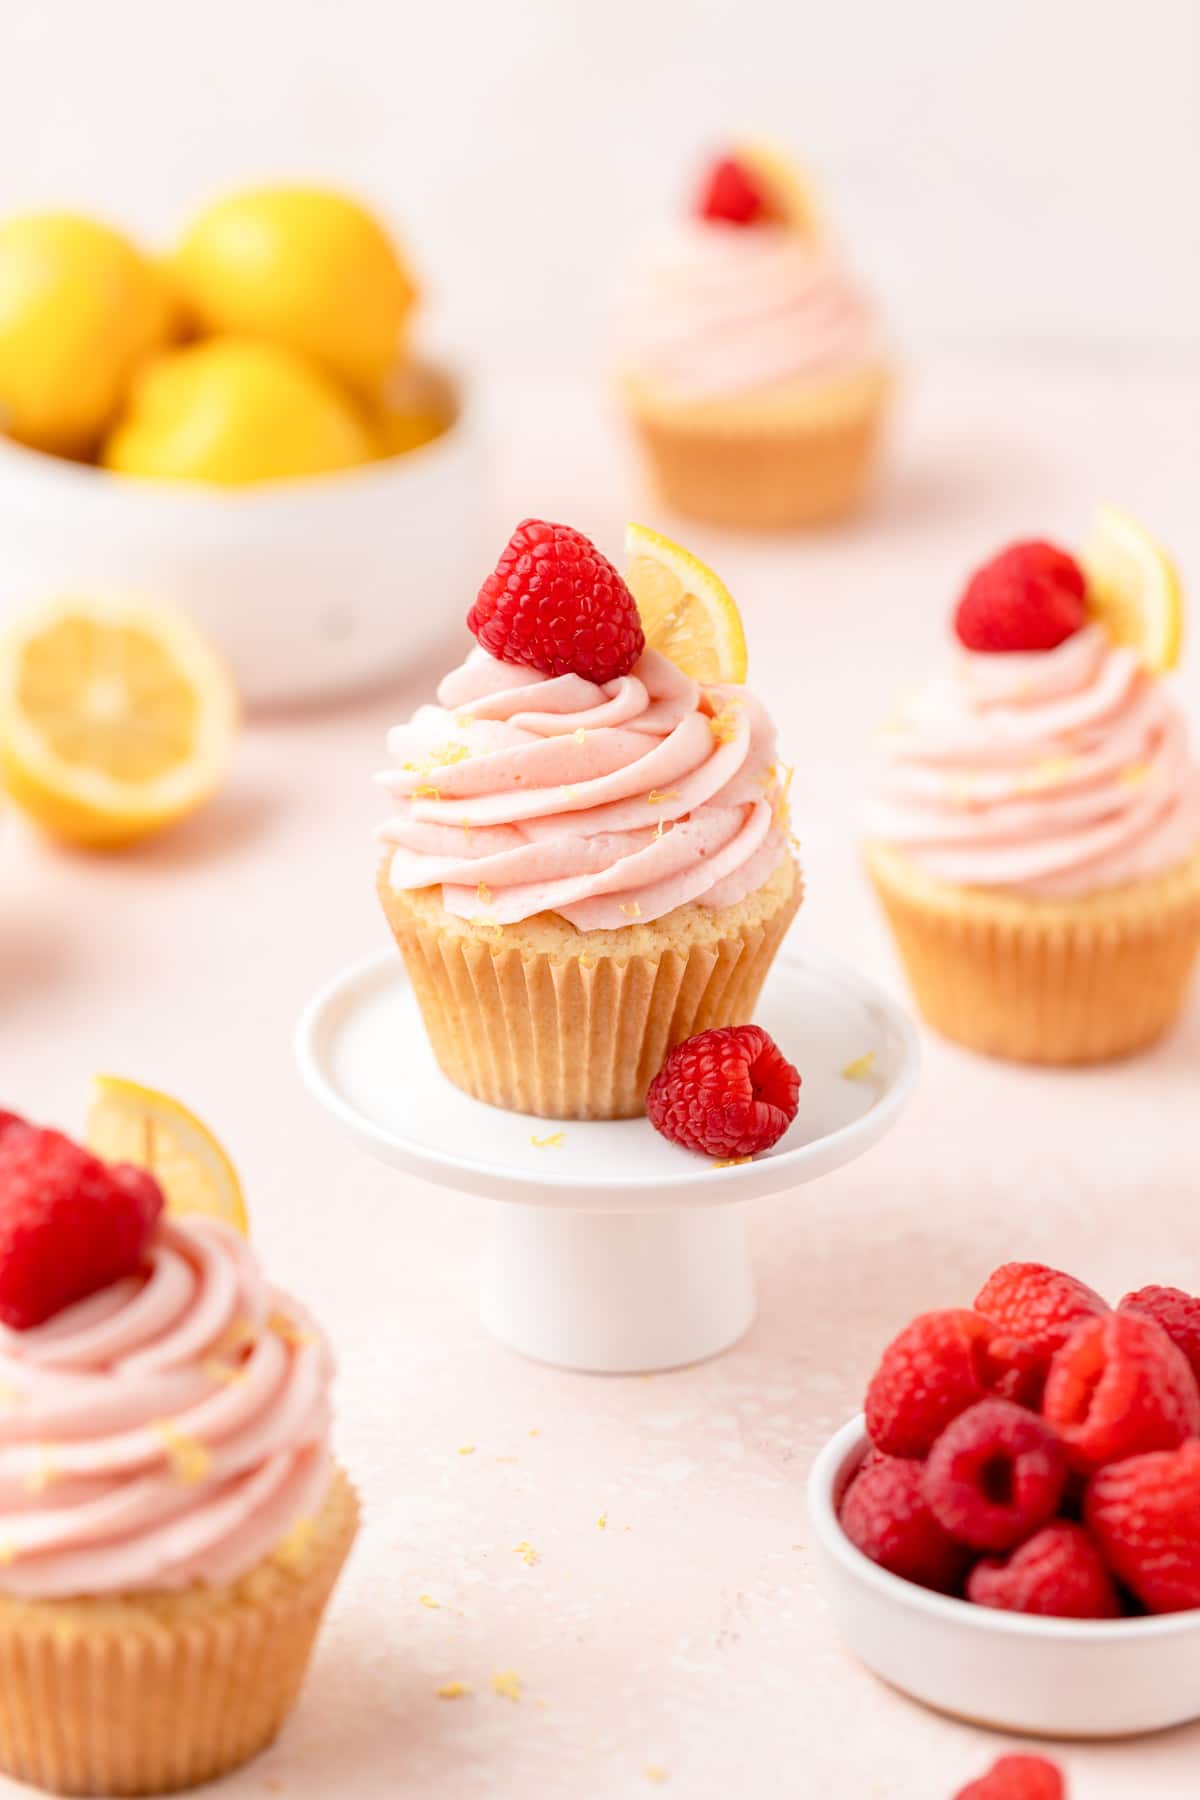 lemon cupcakes with raspberry filling and mascarpone frosting.